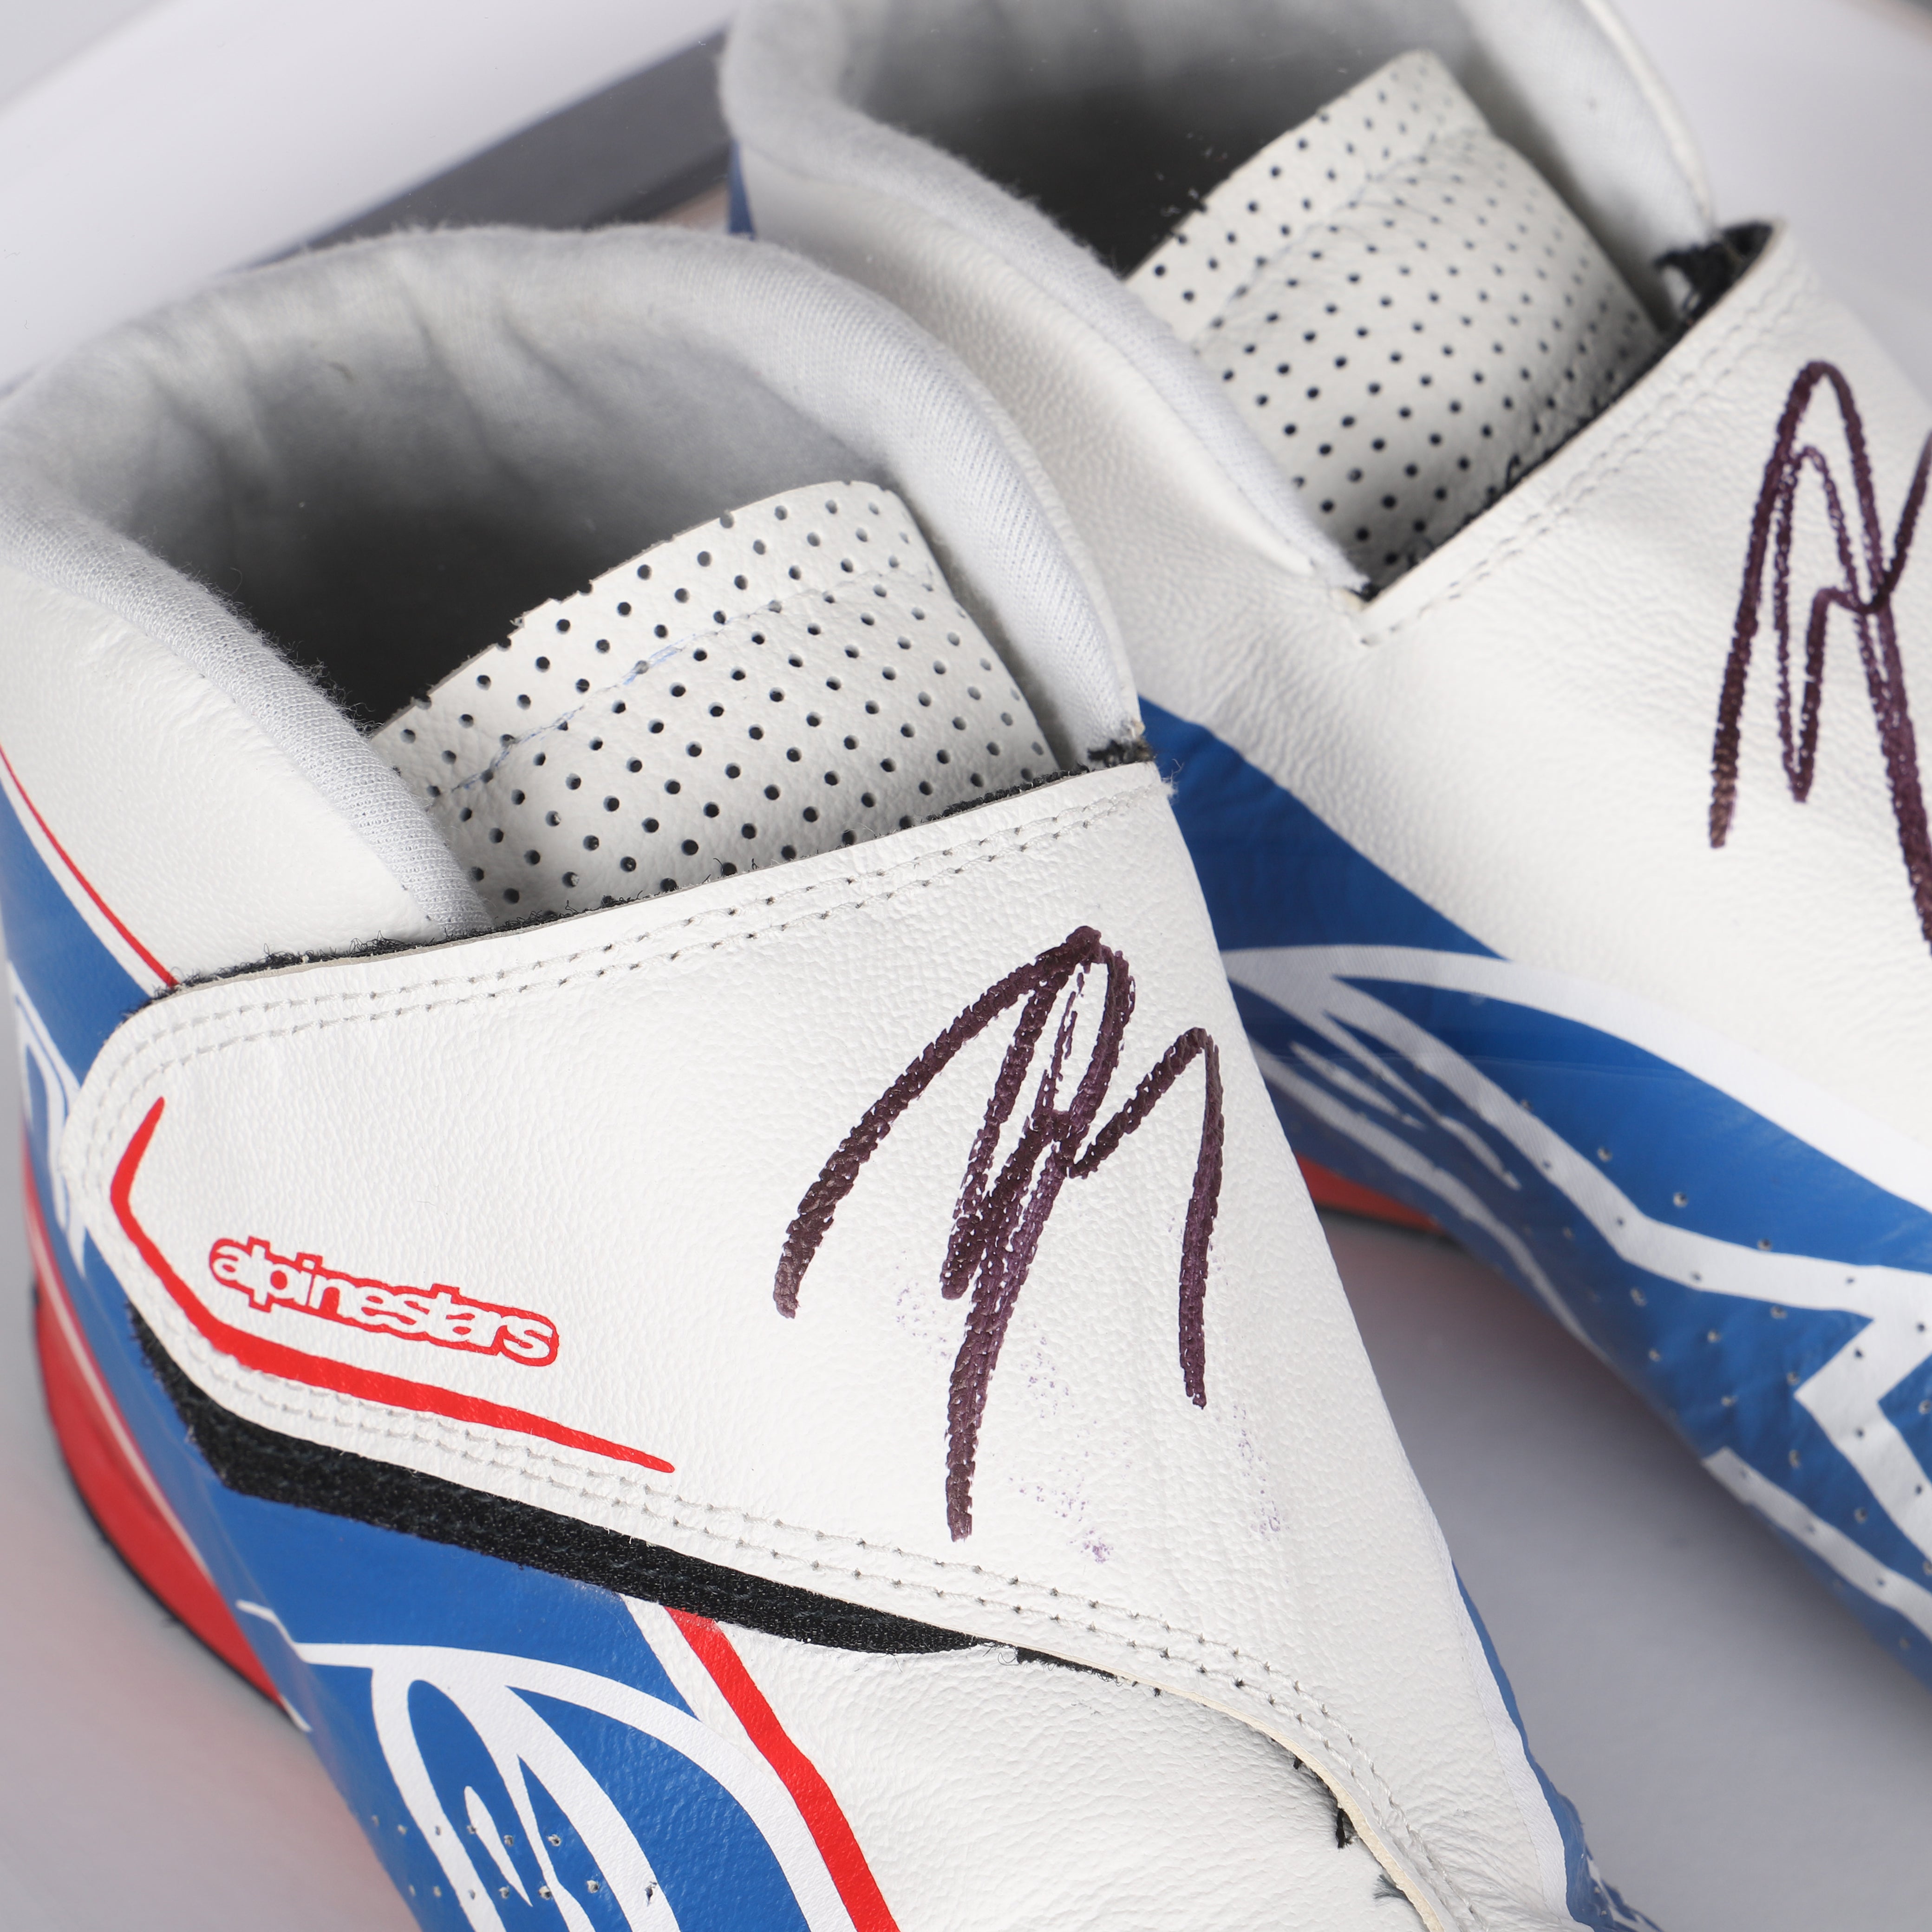 Kevin Magnussen 2022 Signed Replica Haas F1 Team Race Boots